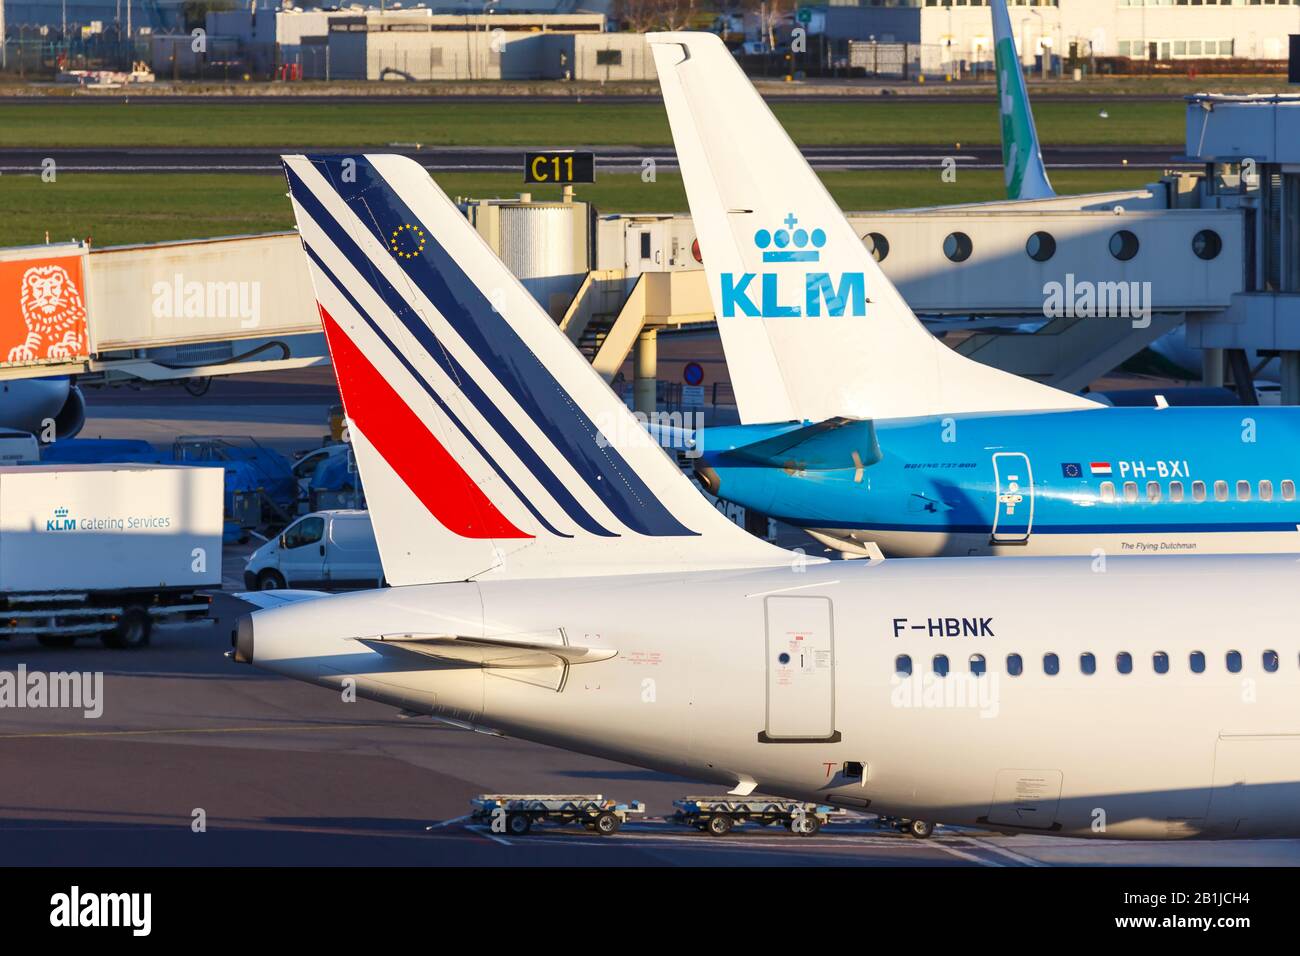 Amsterdam, Netherlands – April 19, 2015: KLM Royal Dutch Airlines and Air France airplanes at Amsterdam Schiphol Airport (AMS) in the Netherlands. Stock Photo